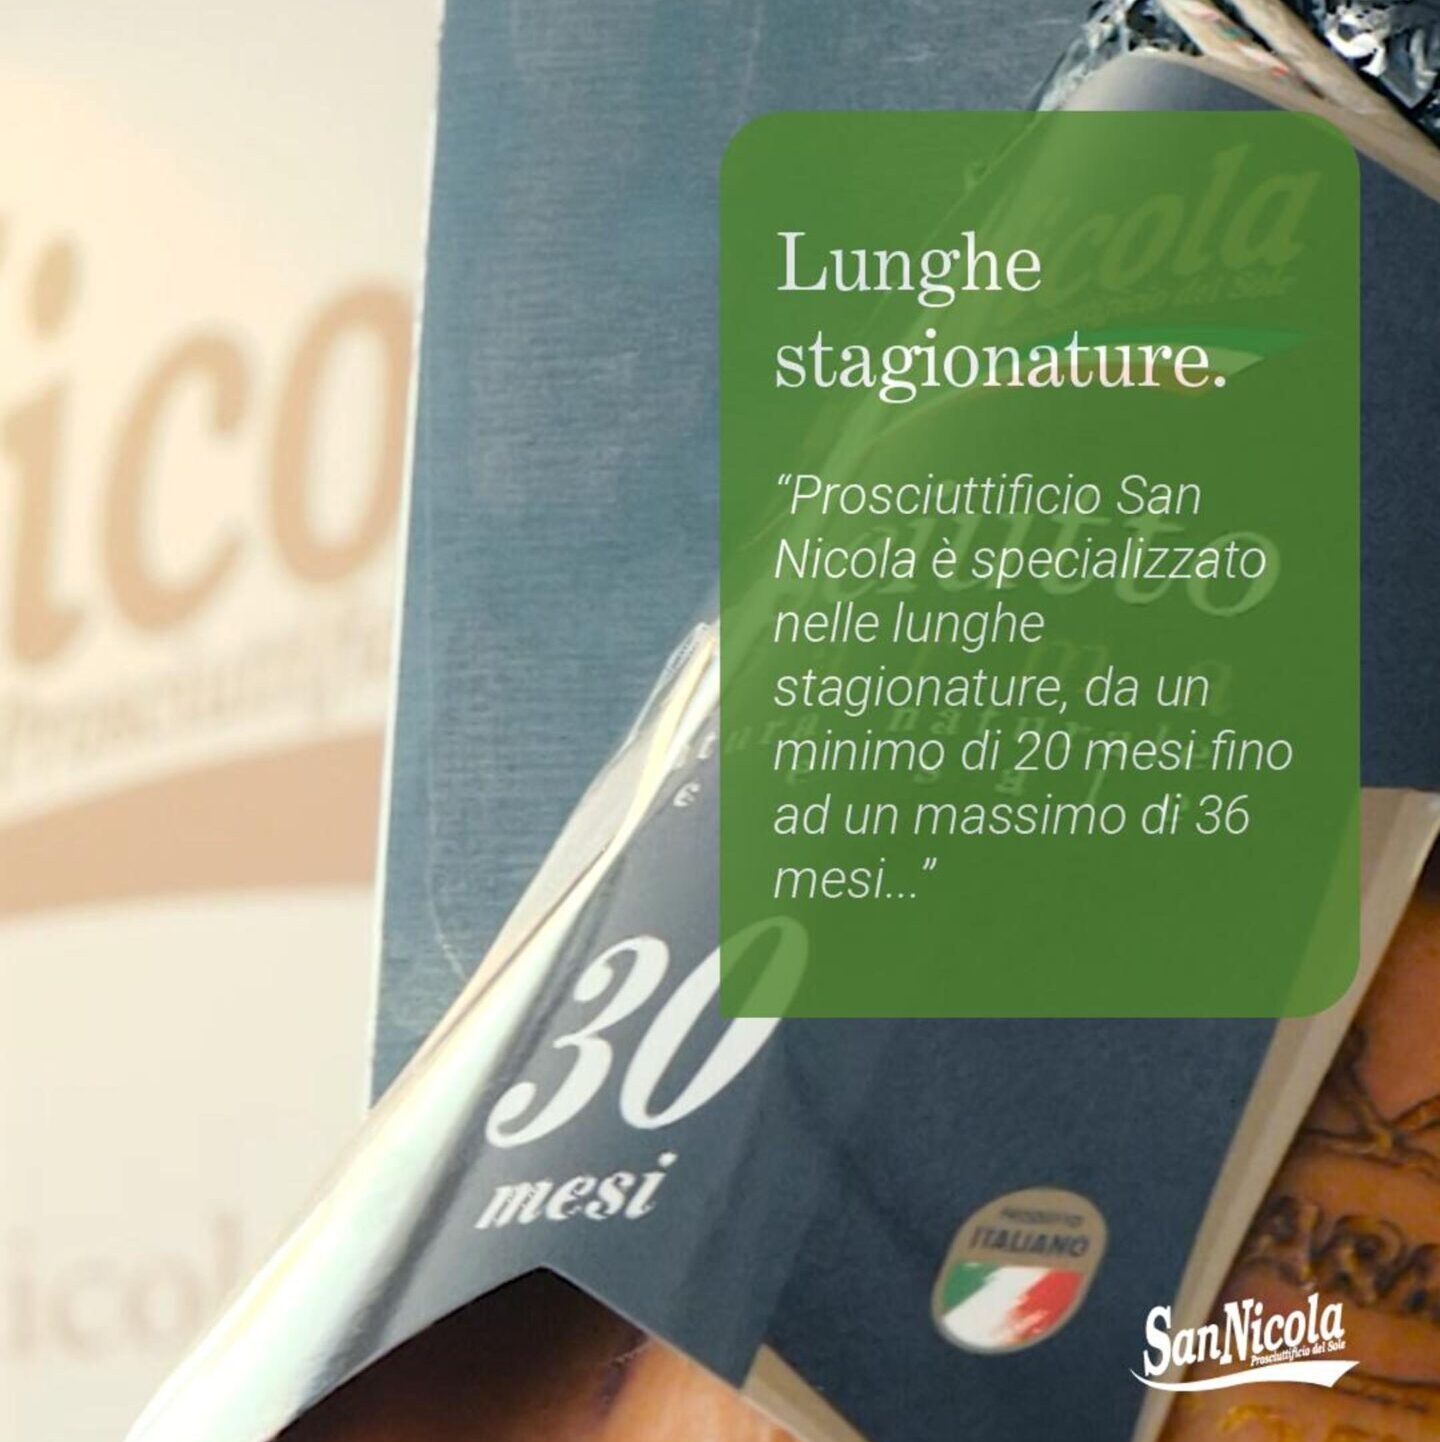 San Nicola Stories, Le lunghe stagionature.